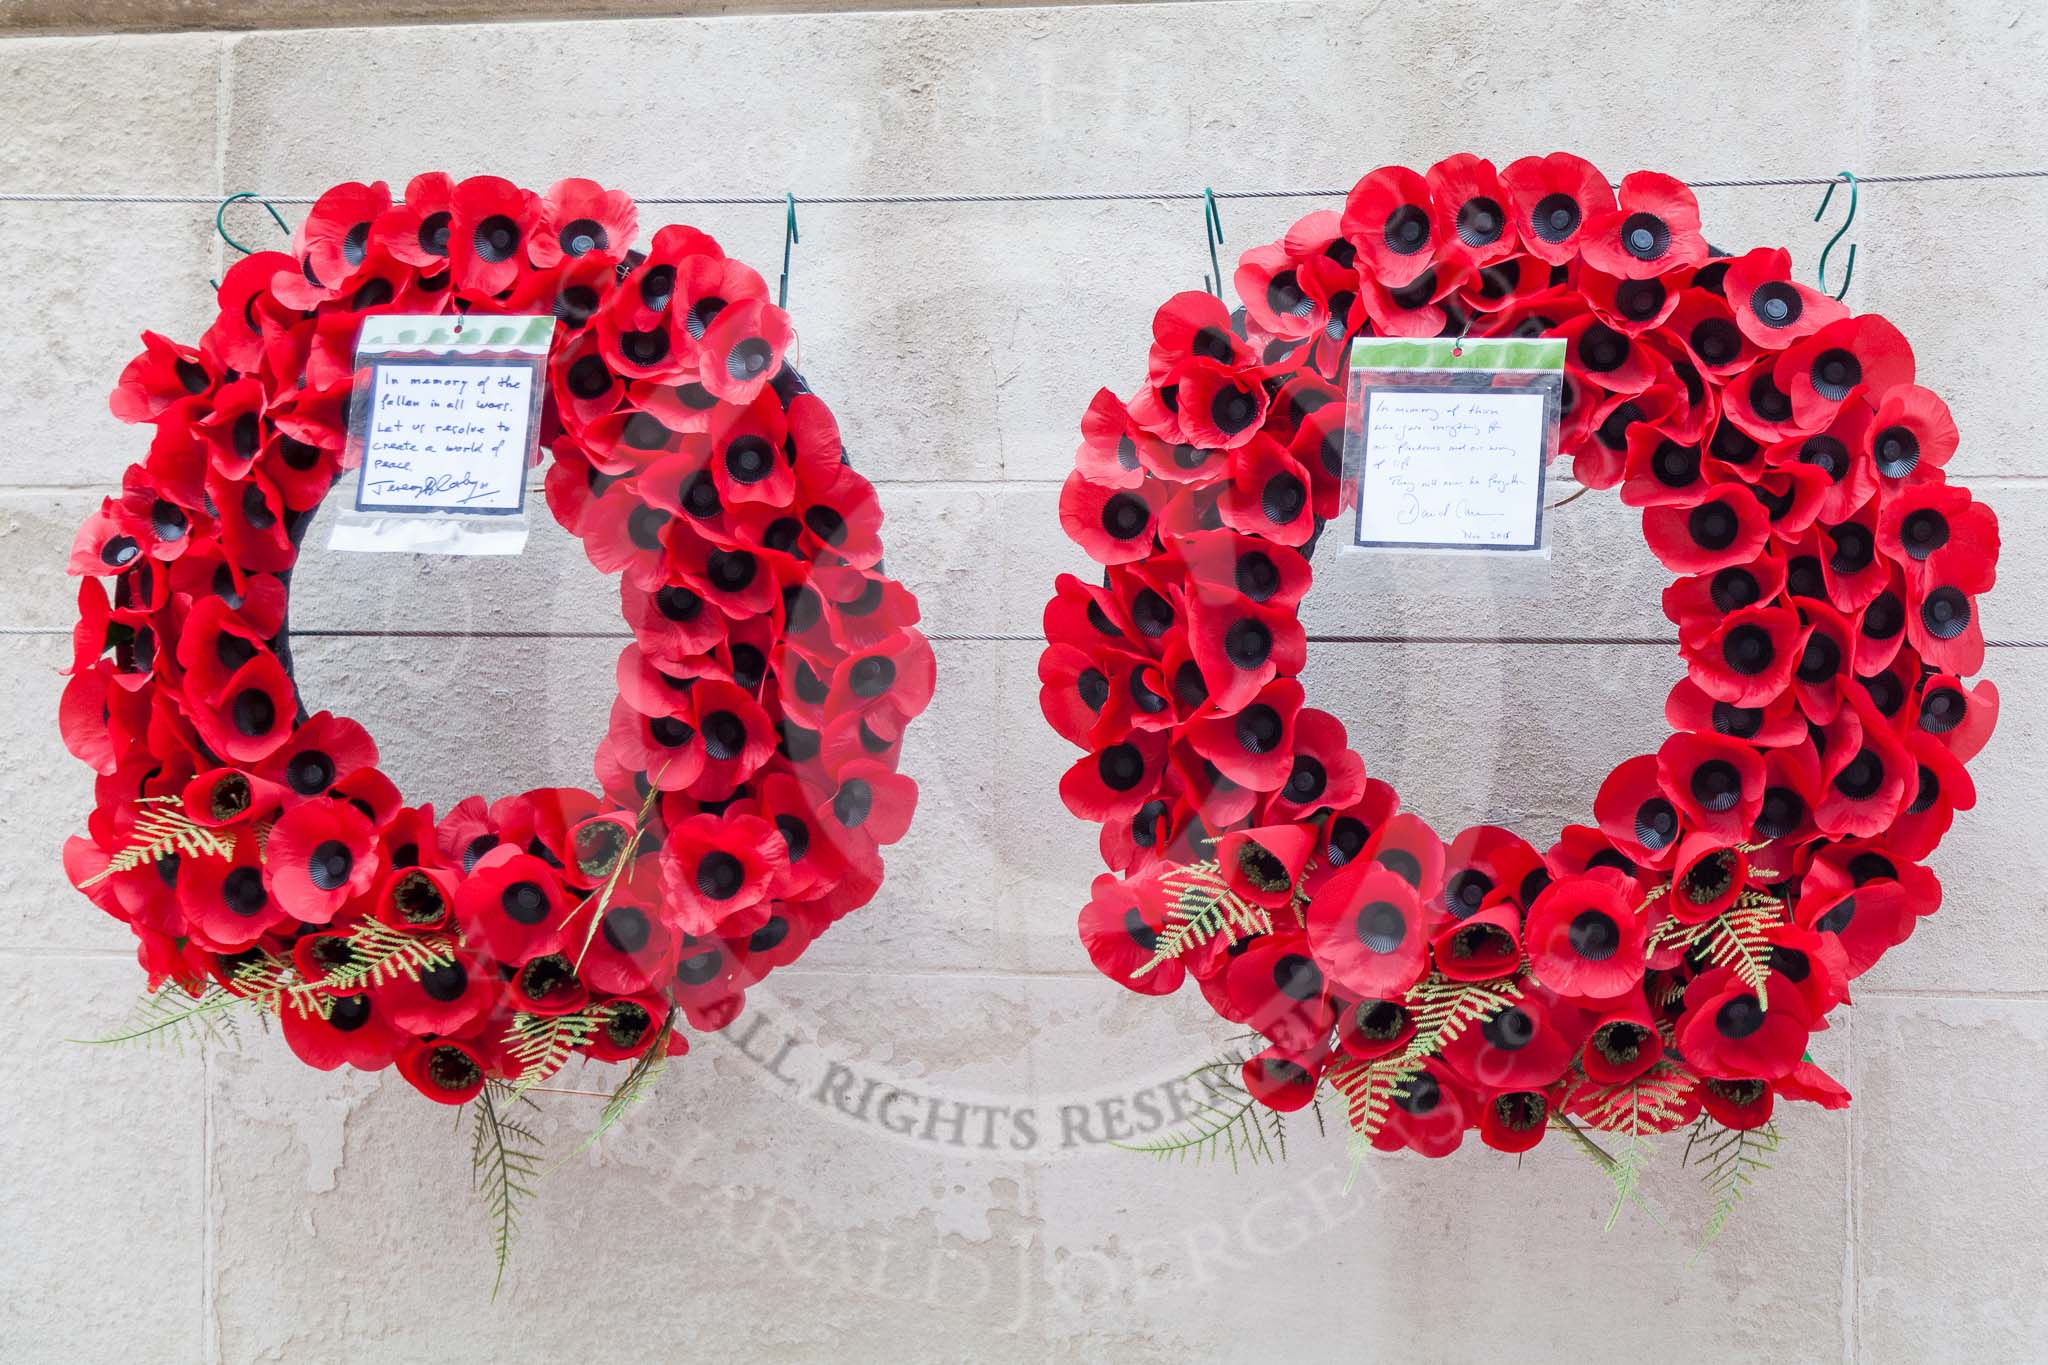 Remembrance Sunday at the Cenotaph 2015: David Cameron's and Jeremy Corbyn's wreath. David Cameron: "In memory of those who gave everything for our freedom and our way of life. They will not be forgotten". Jeremy Corbyn: "In memory of the fallen in all wars. Let us resolve to create a world of peace". Image #375, 08 November 2015 12:41 Whitehall, London, UK